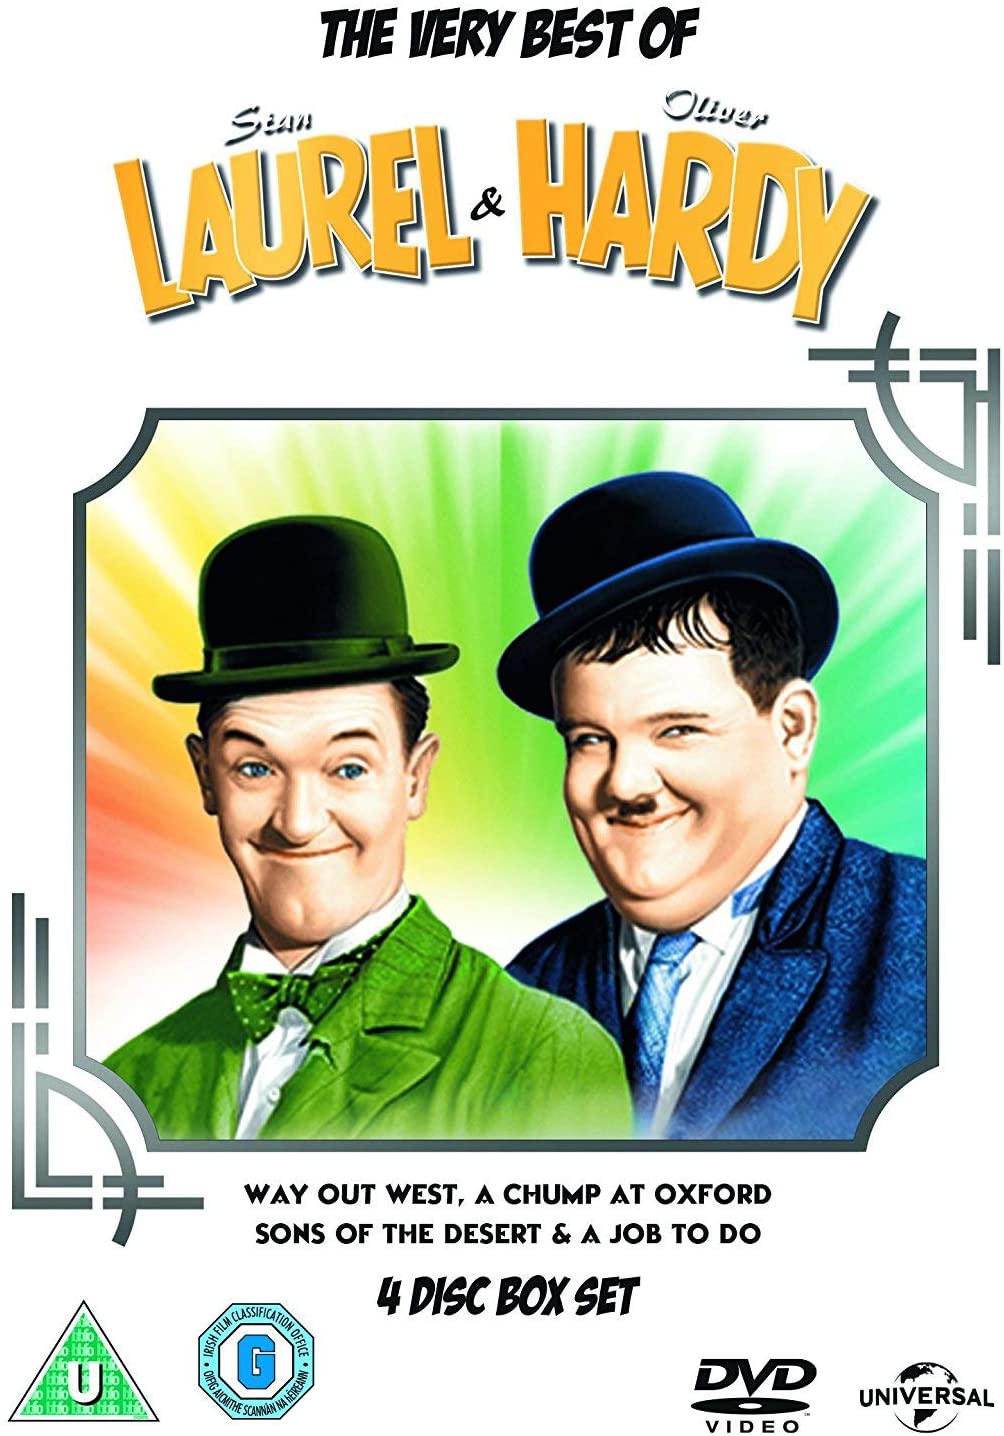 The Very Best of Laurel & Hardy [2015] - Comedy [DVD]